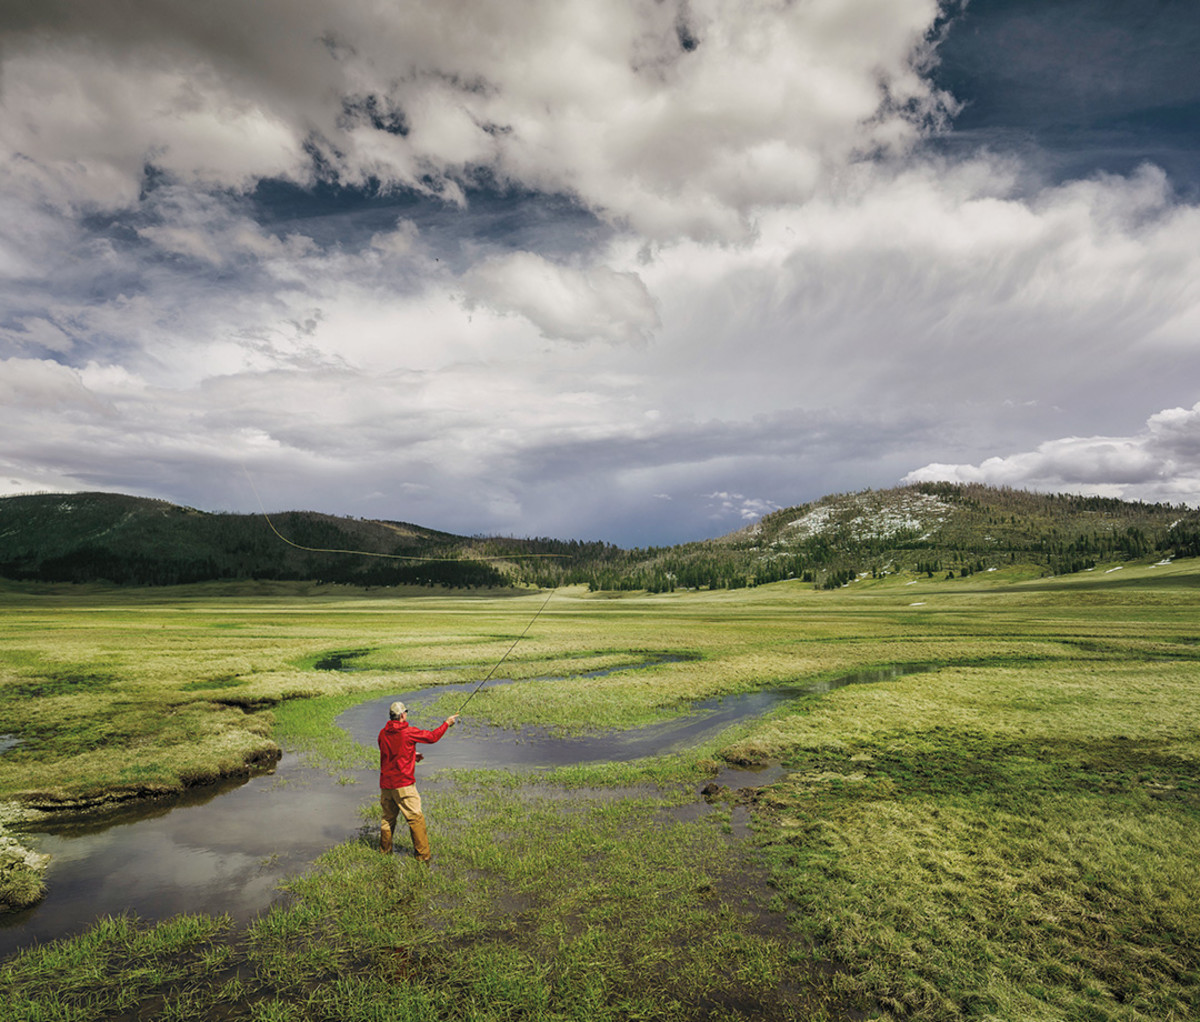 Senator Heinrich fishing the Valles Caldera, a place he helped preserve in 2014.